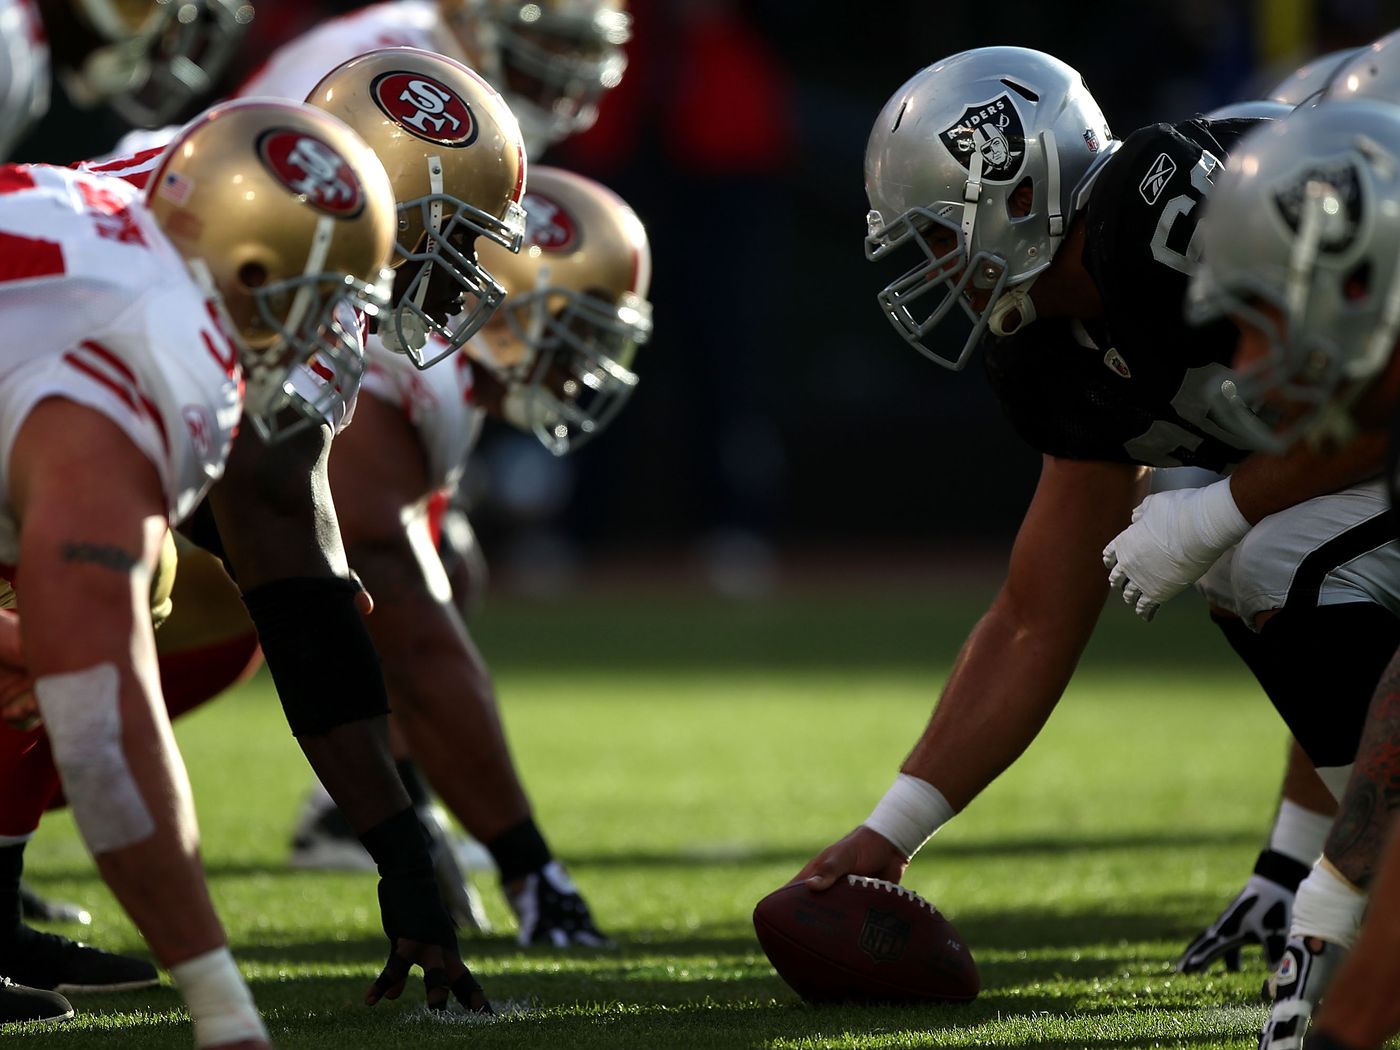 49ers vs. Raiders: Why each team will cover the spread - Niners Nation